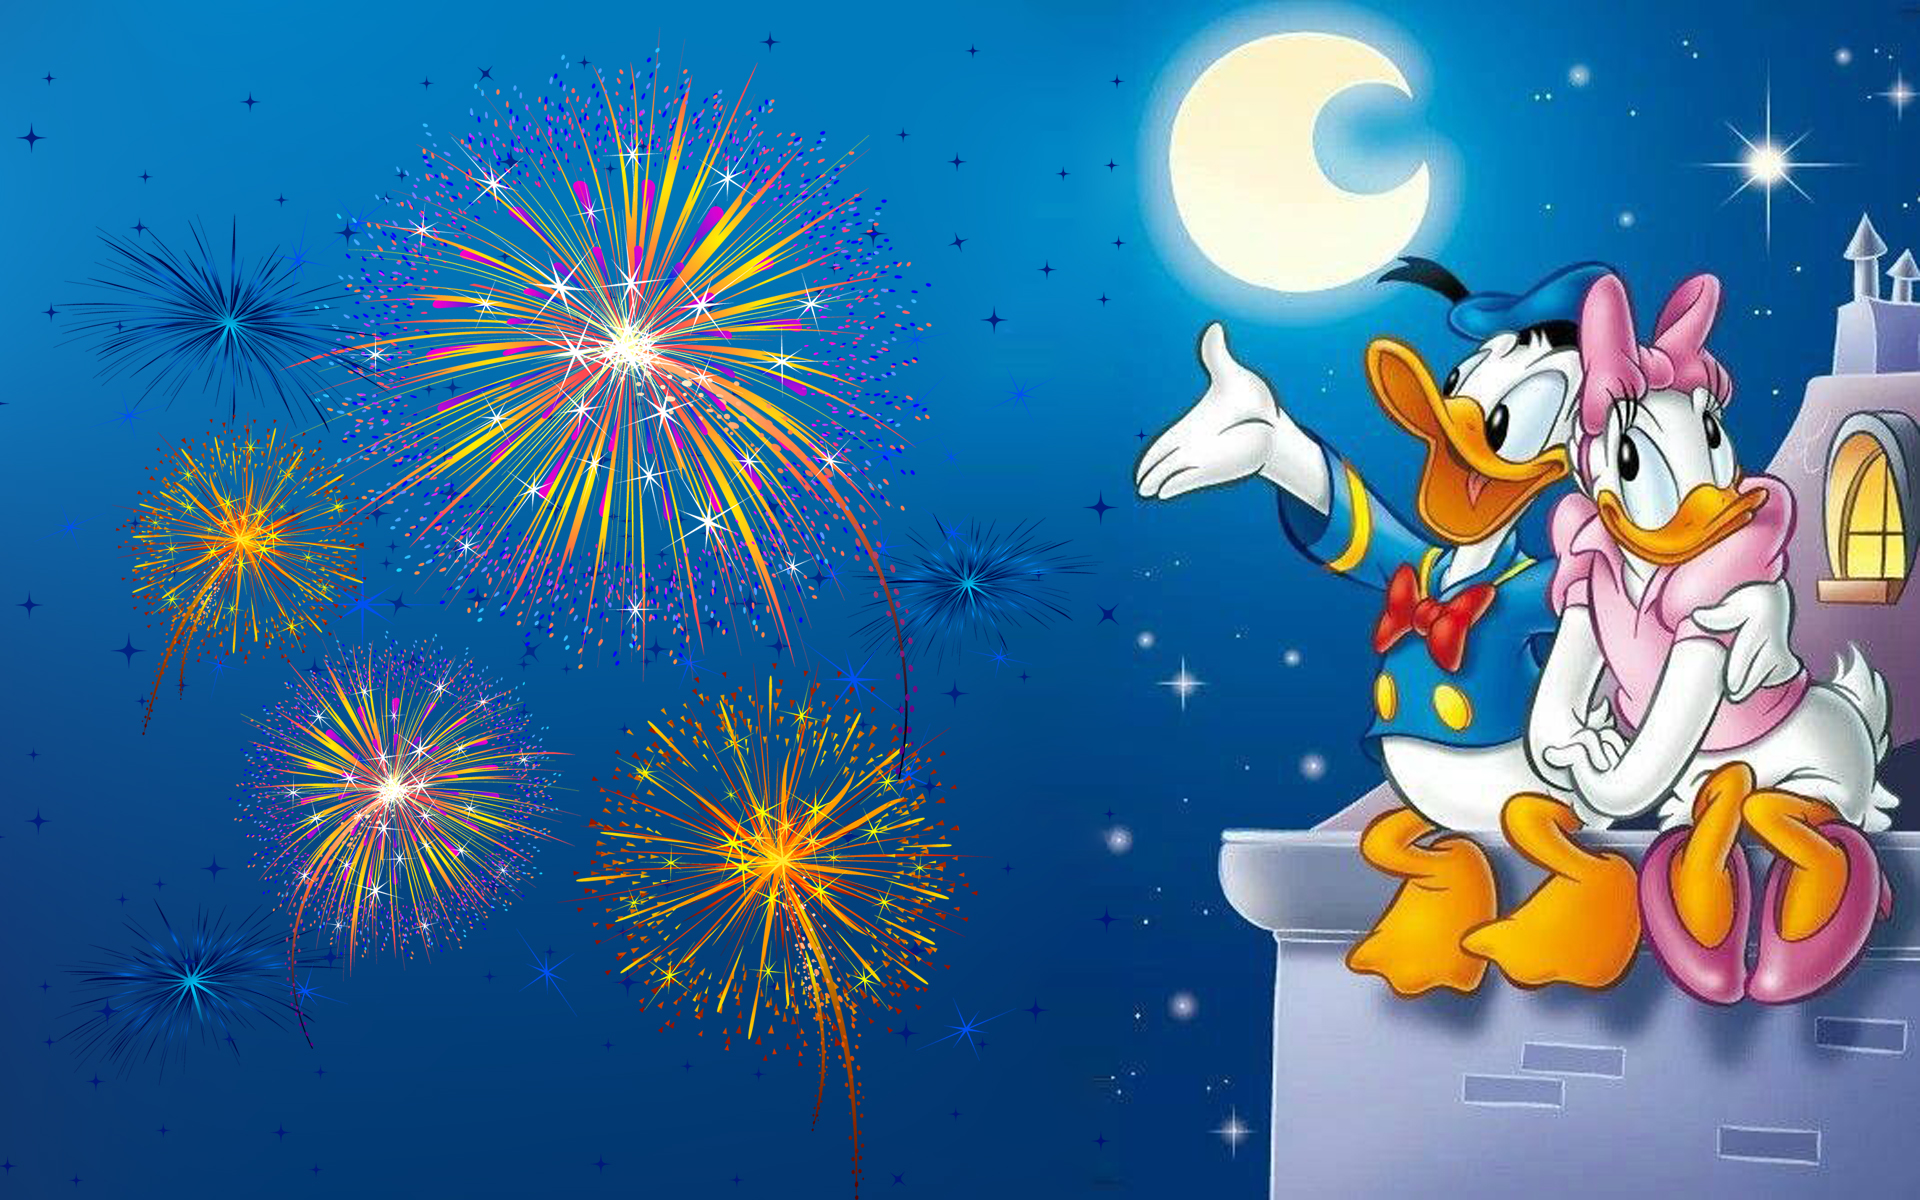 Donald Duck And Daisy Duck Romantic Evening Watching The Full Moon